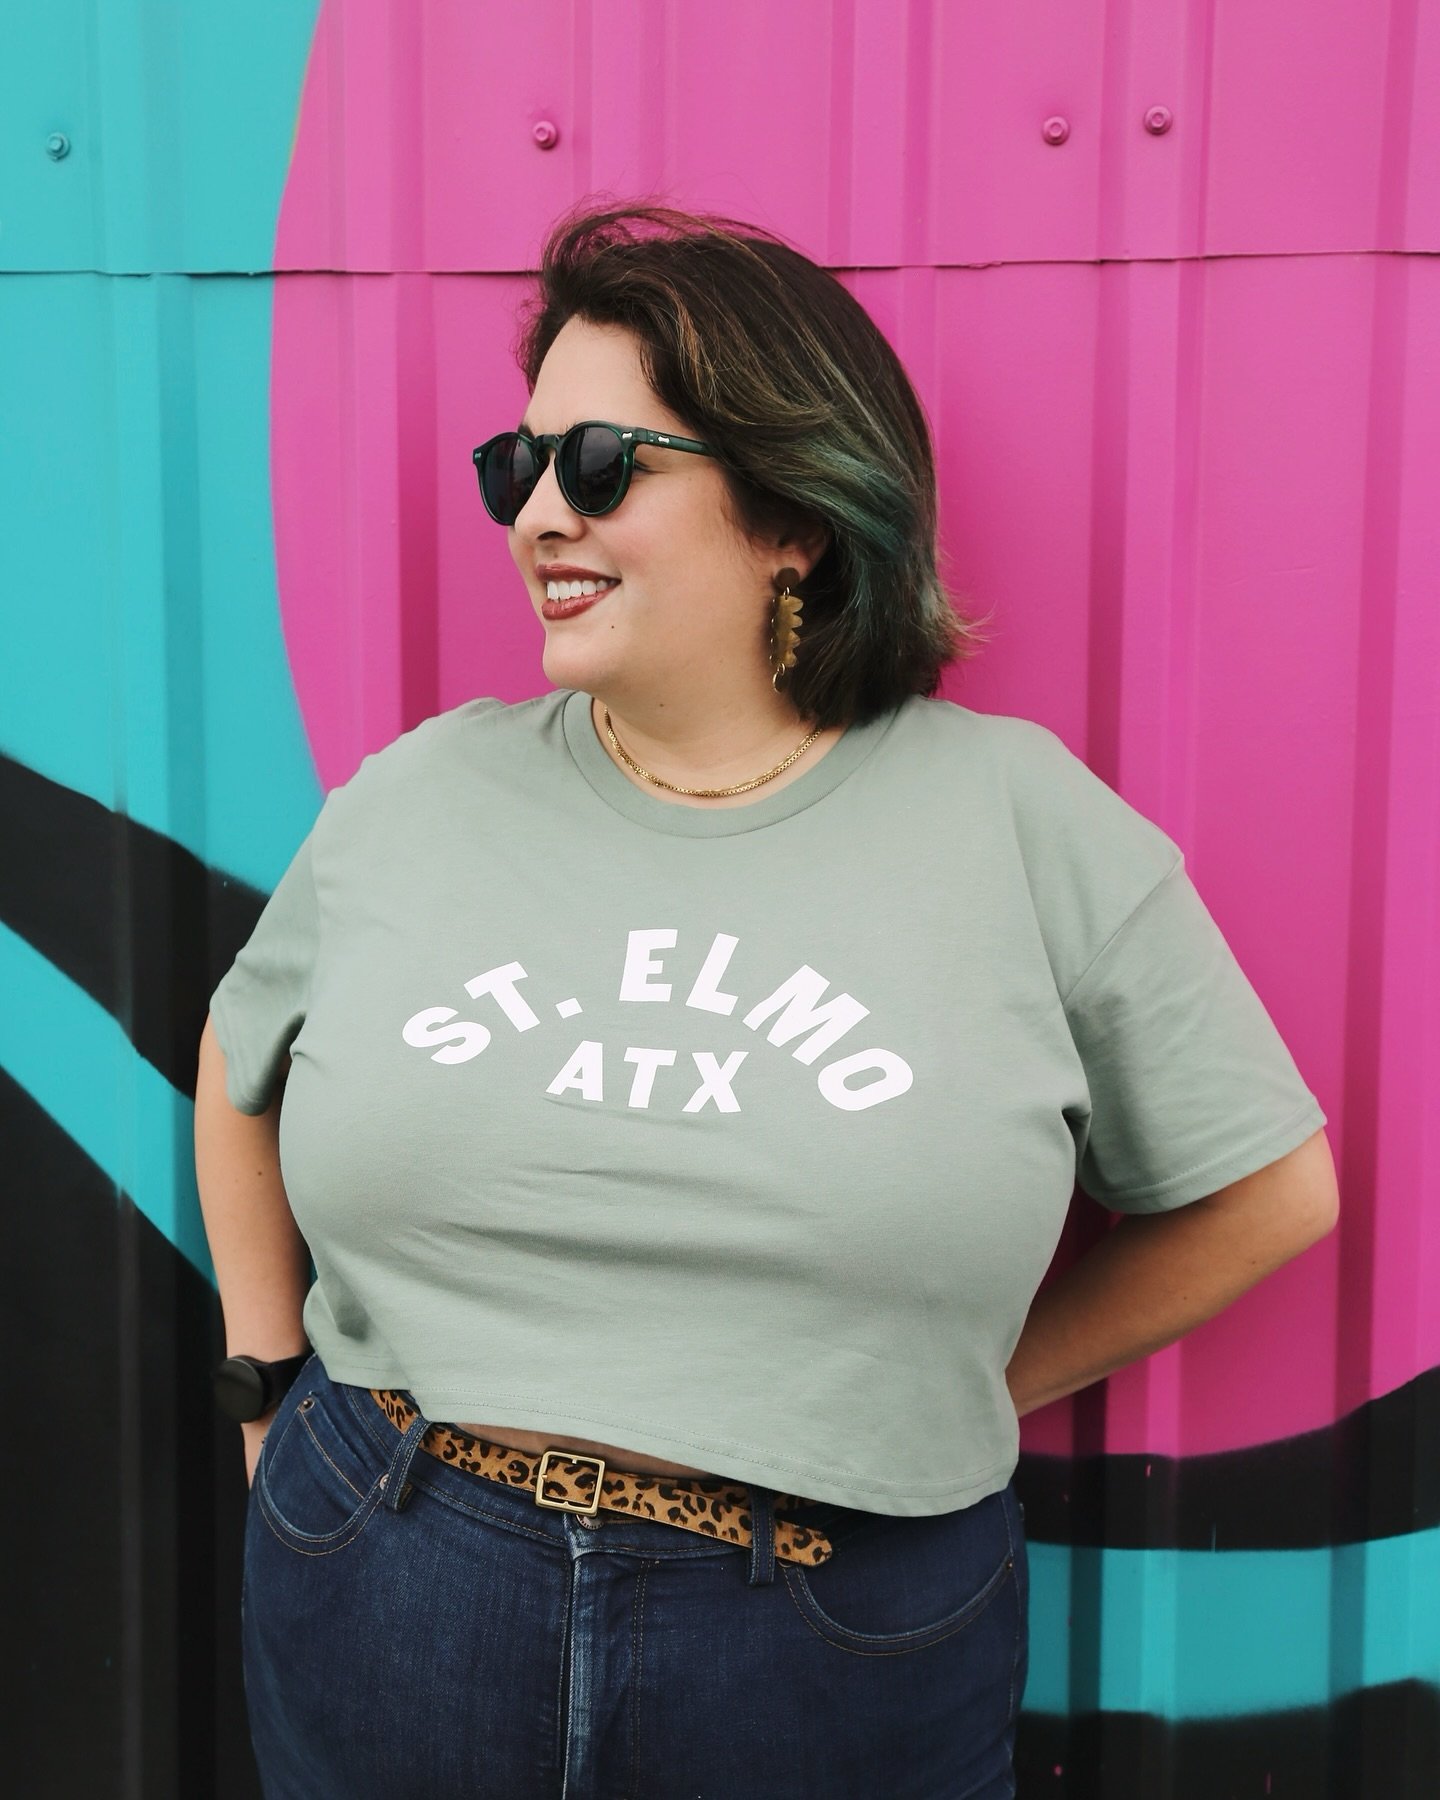 ✨NEW✨St. Elmo crops!

Sage crop tops just dropped. Swing by the brewery or order online!🎽 

&bull;&bull;&bull;&bull;
Modeled by @rebeccaaaaaaahh 🌿